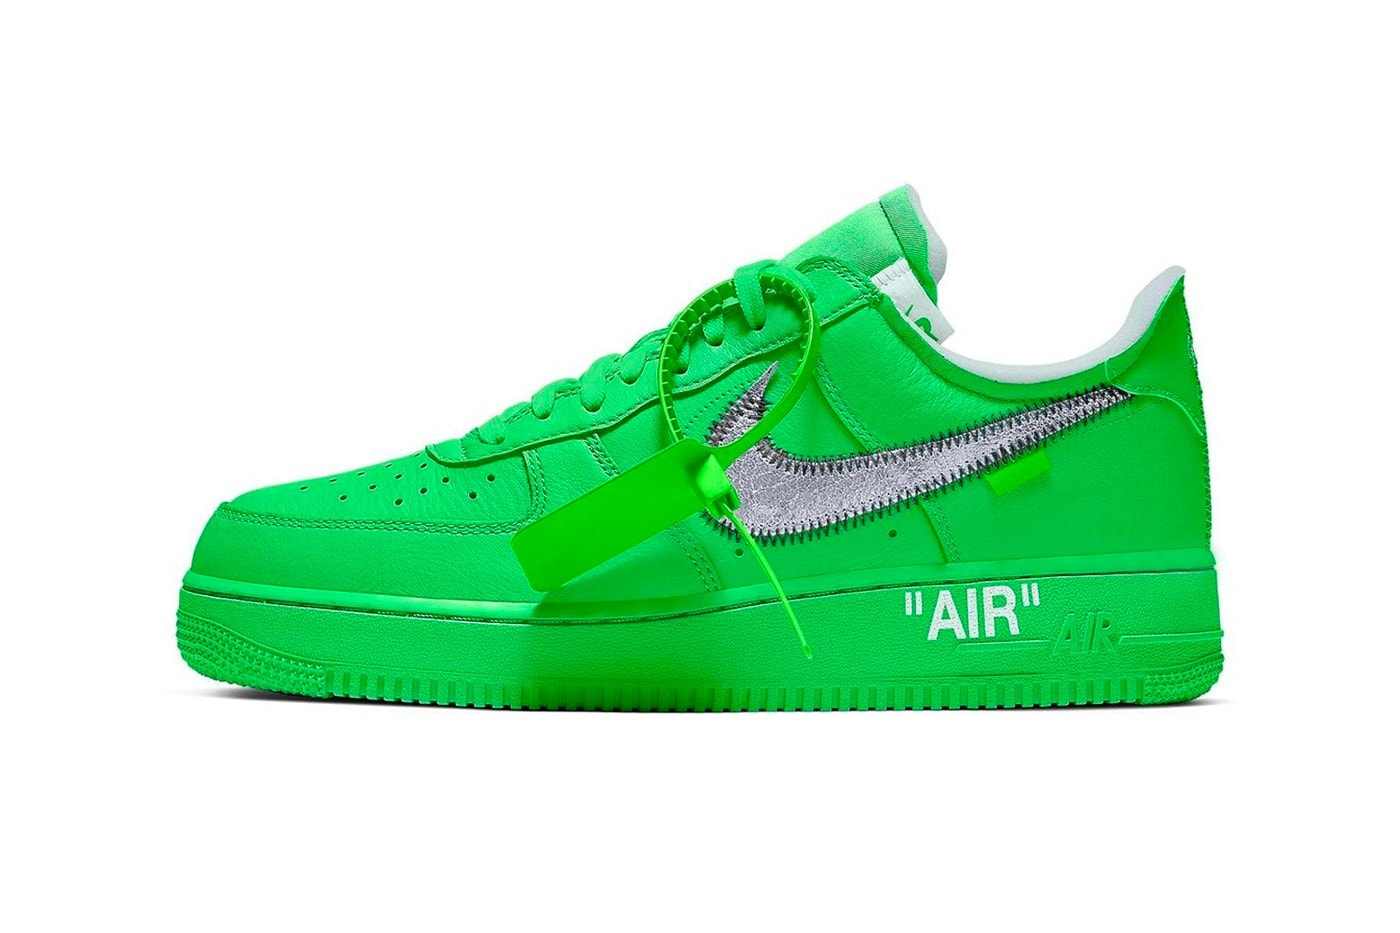 Off-White™ x Nike Air Force 1 Low「Green」聯乘鞋款或將展開發售